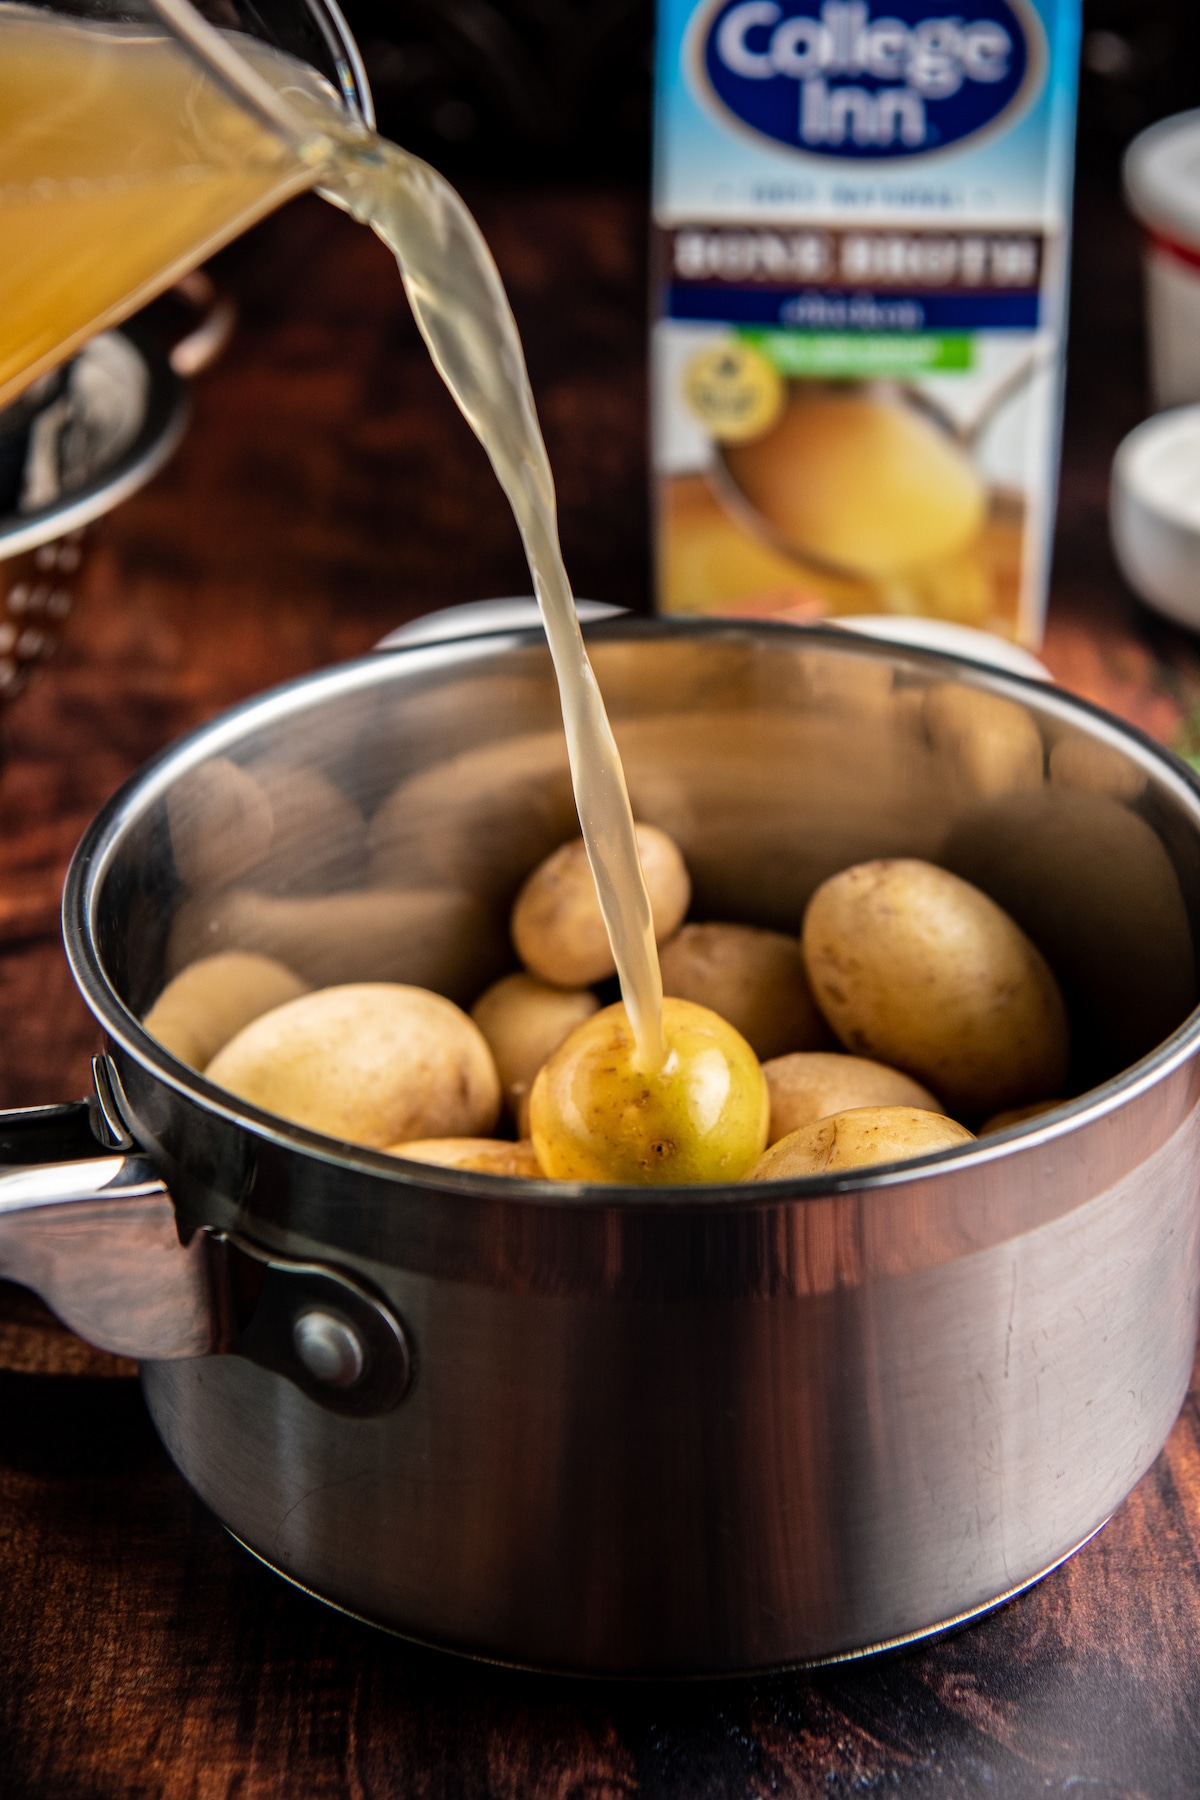 Chicken broth being poured into a skillet with potatoes.